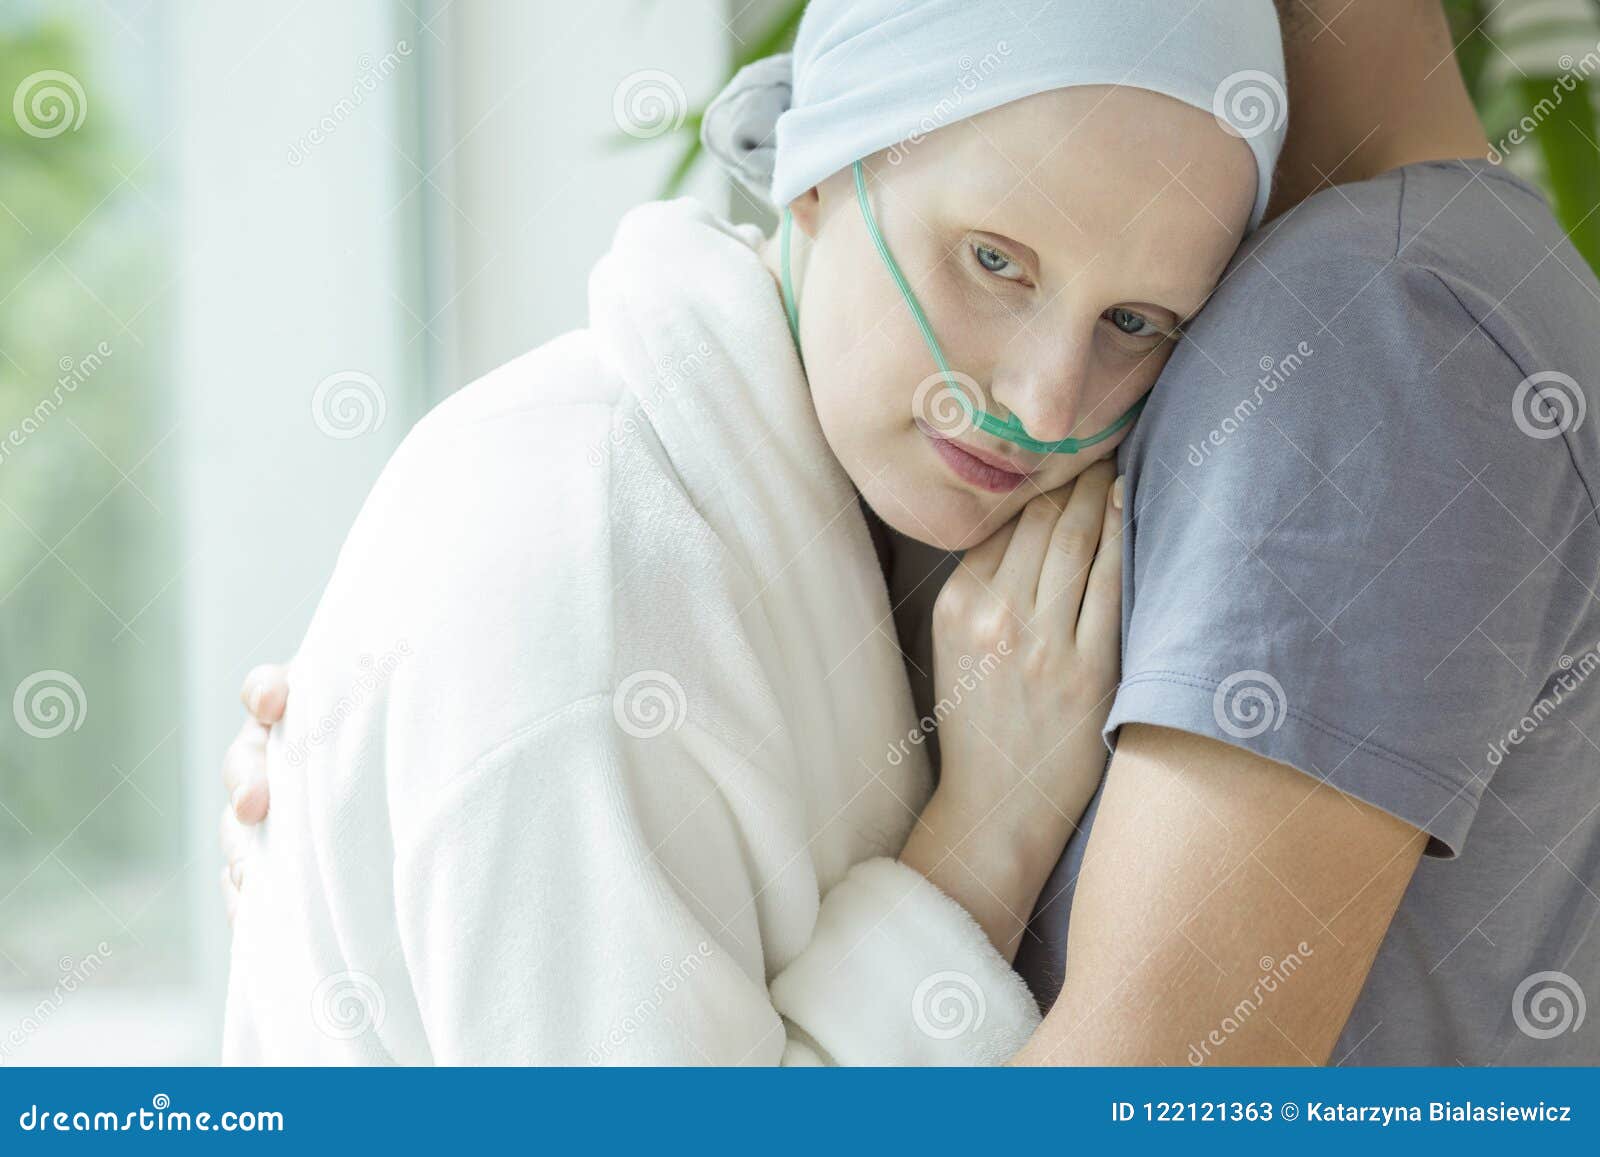 weak woman with cancer hugging her husband during chemotherapy